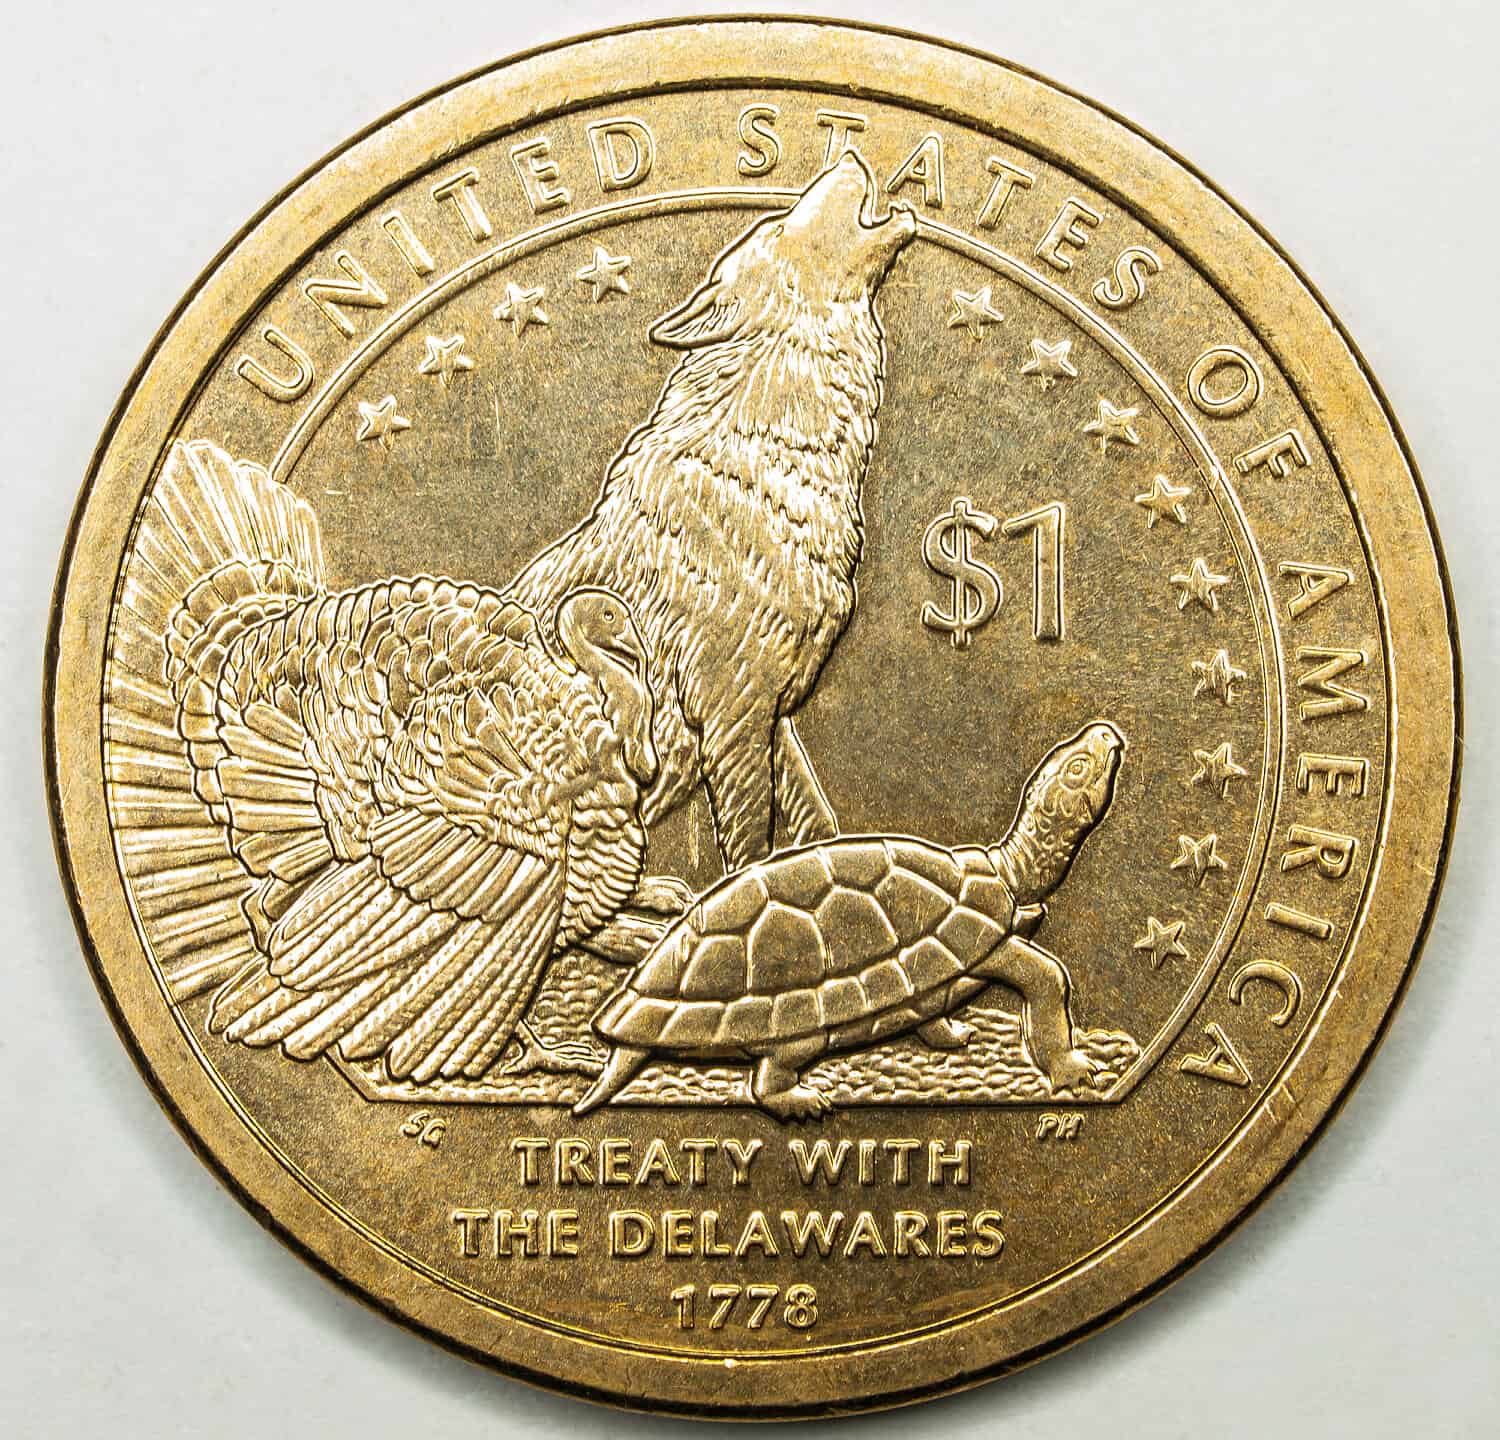 US Gold Dollar Coin Featuring Treaty withe the Delawares